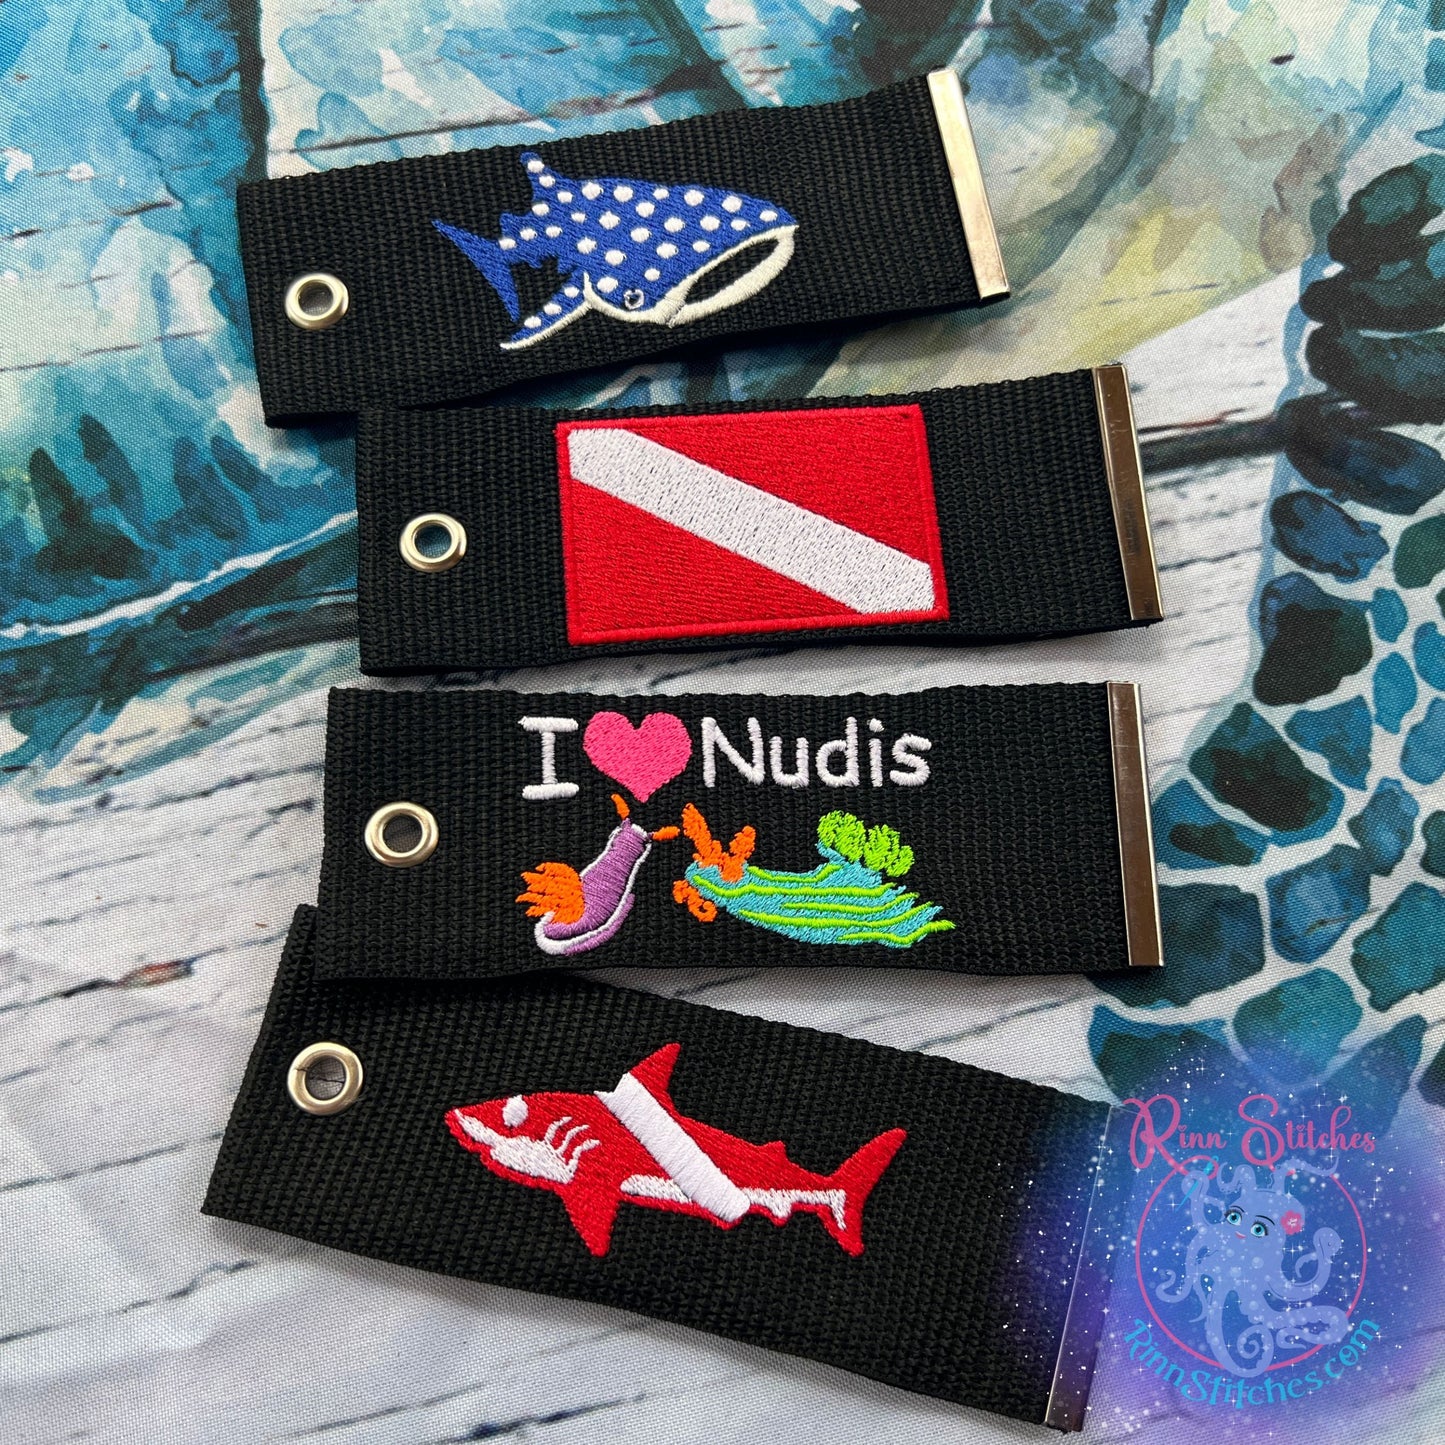 Tiger Shark Luggage Tag, Personalized Embroidered Bag Tag for all your Travel needs